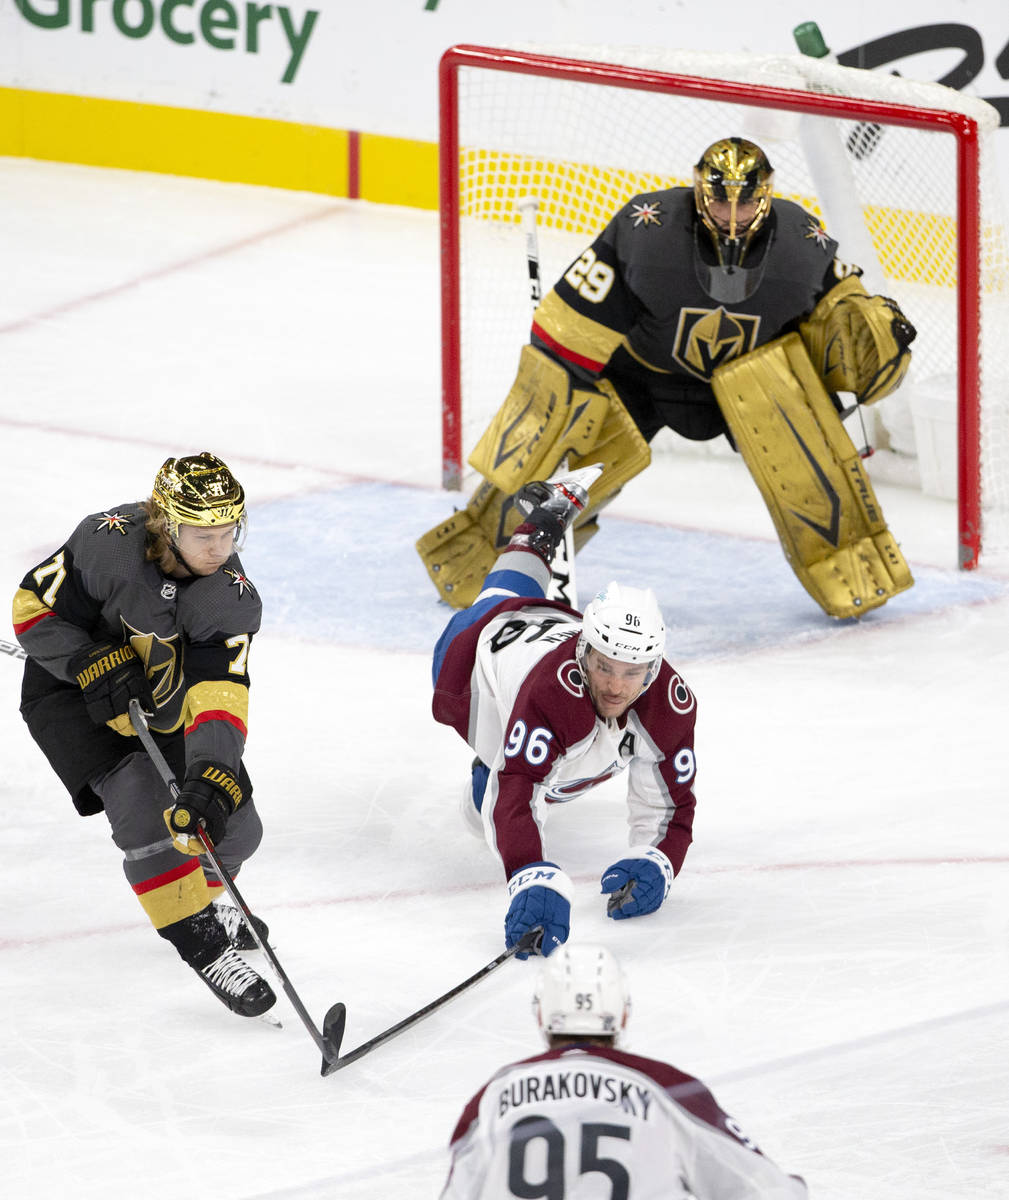 Avalanche beat Golden Knights in unforgettable outdoor game at